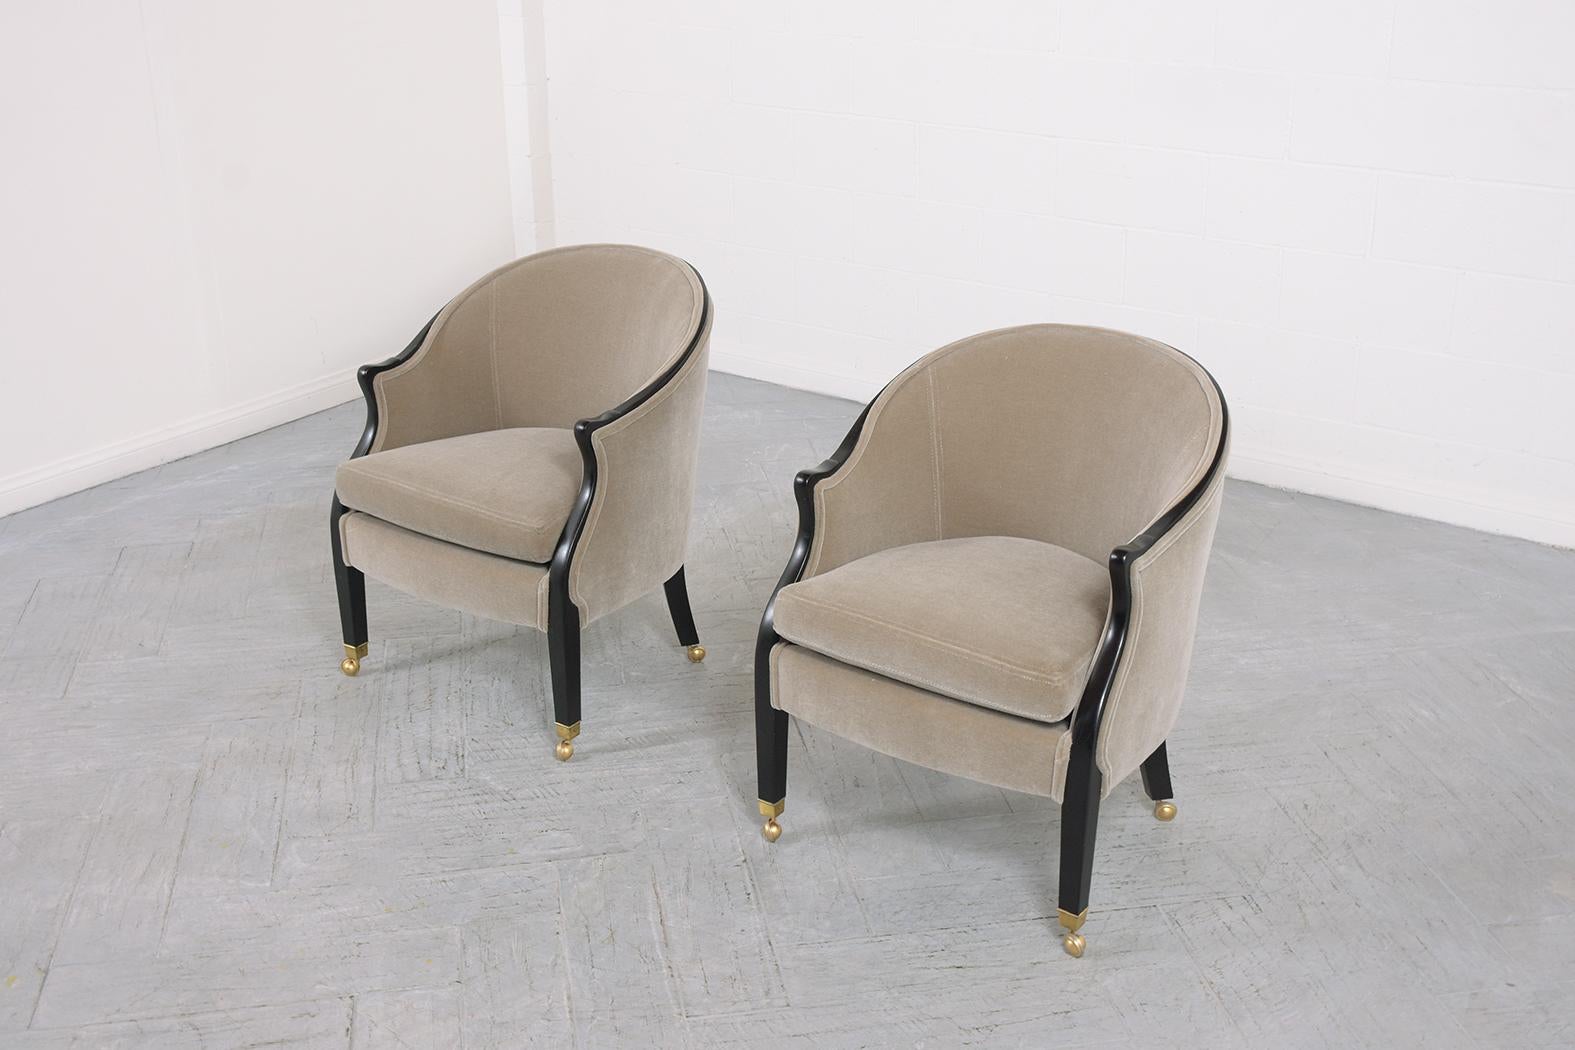 An extraordinary pair of lounge chairs by Baker is beautifully hand-crafted out of mahogany wood in great condition and have been fully restored refinished and upholstered by our expert craftsmen team. This 1950s pair of armchairs features a solid